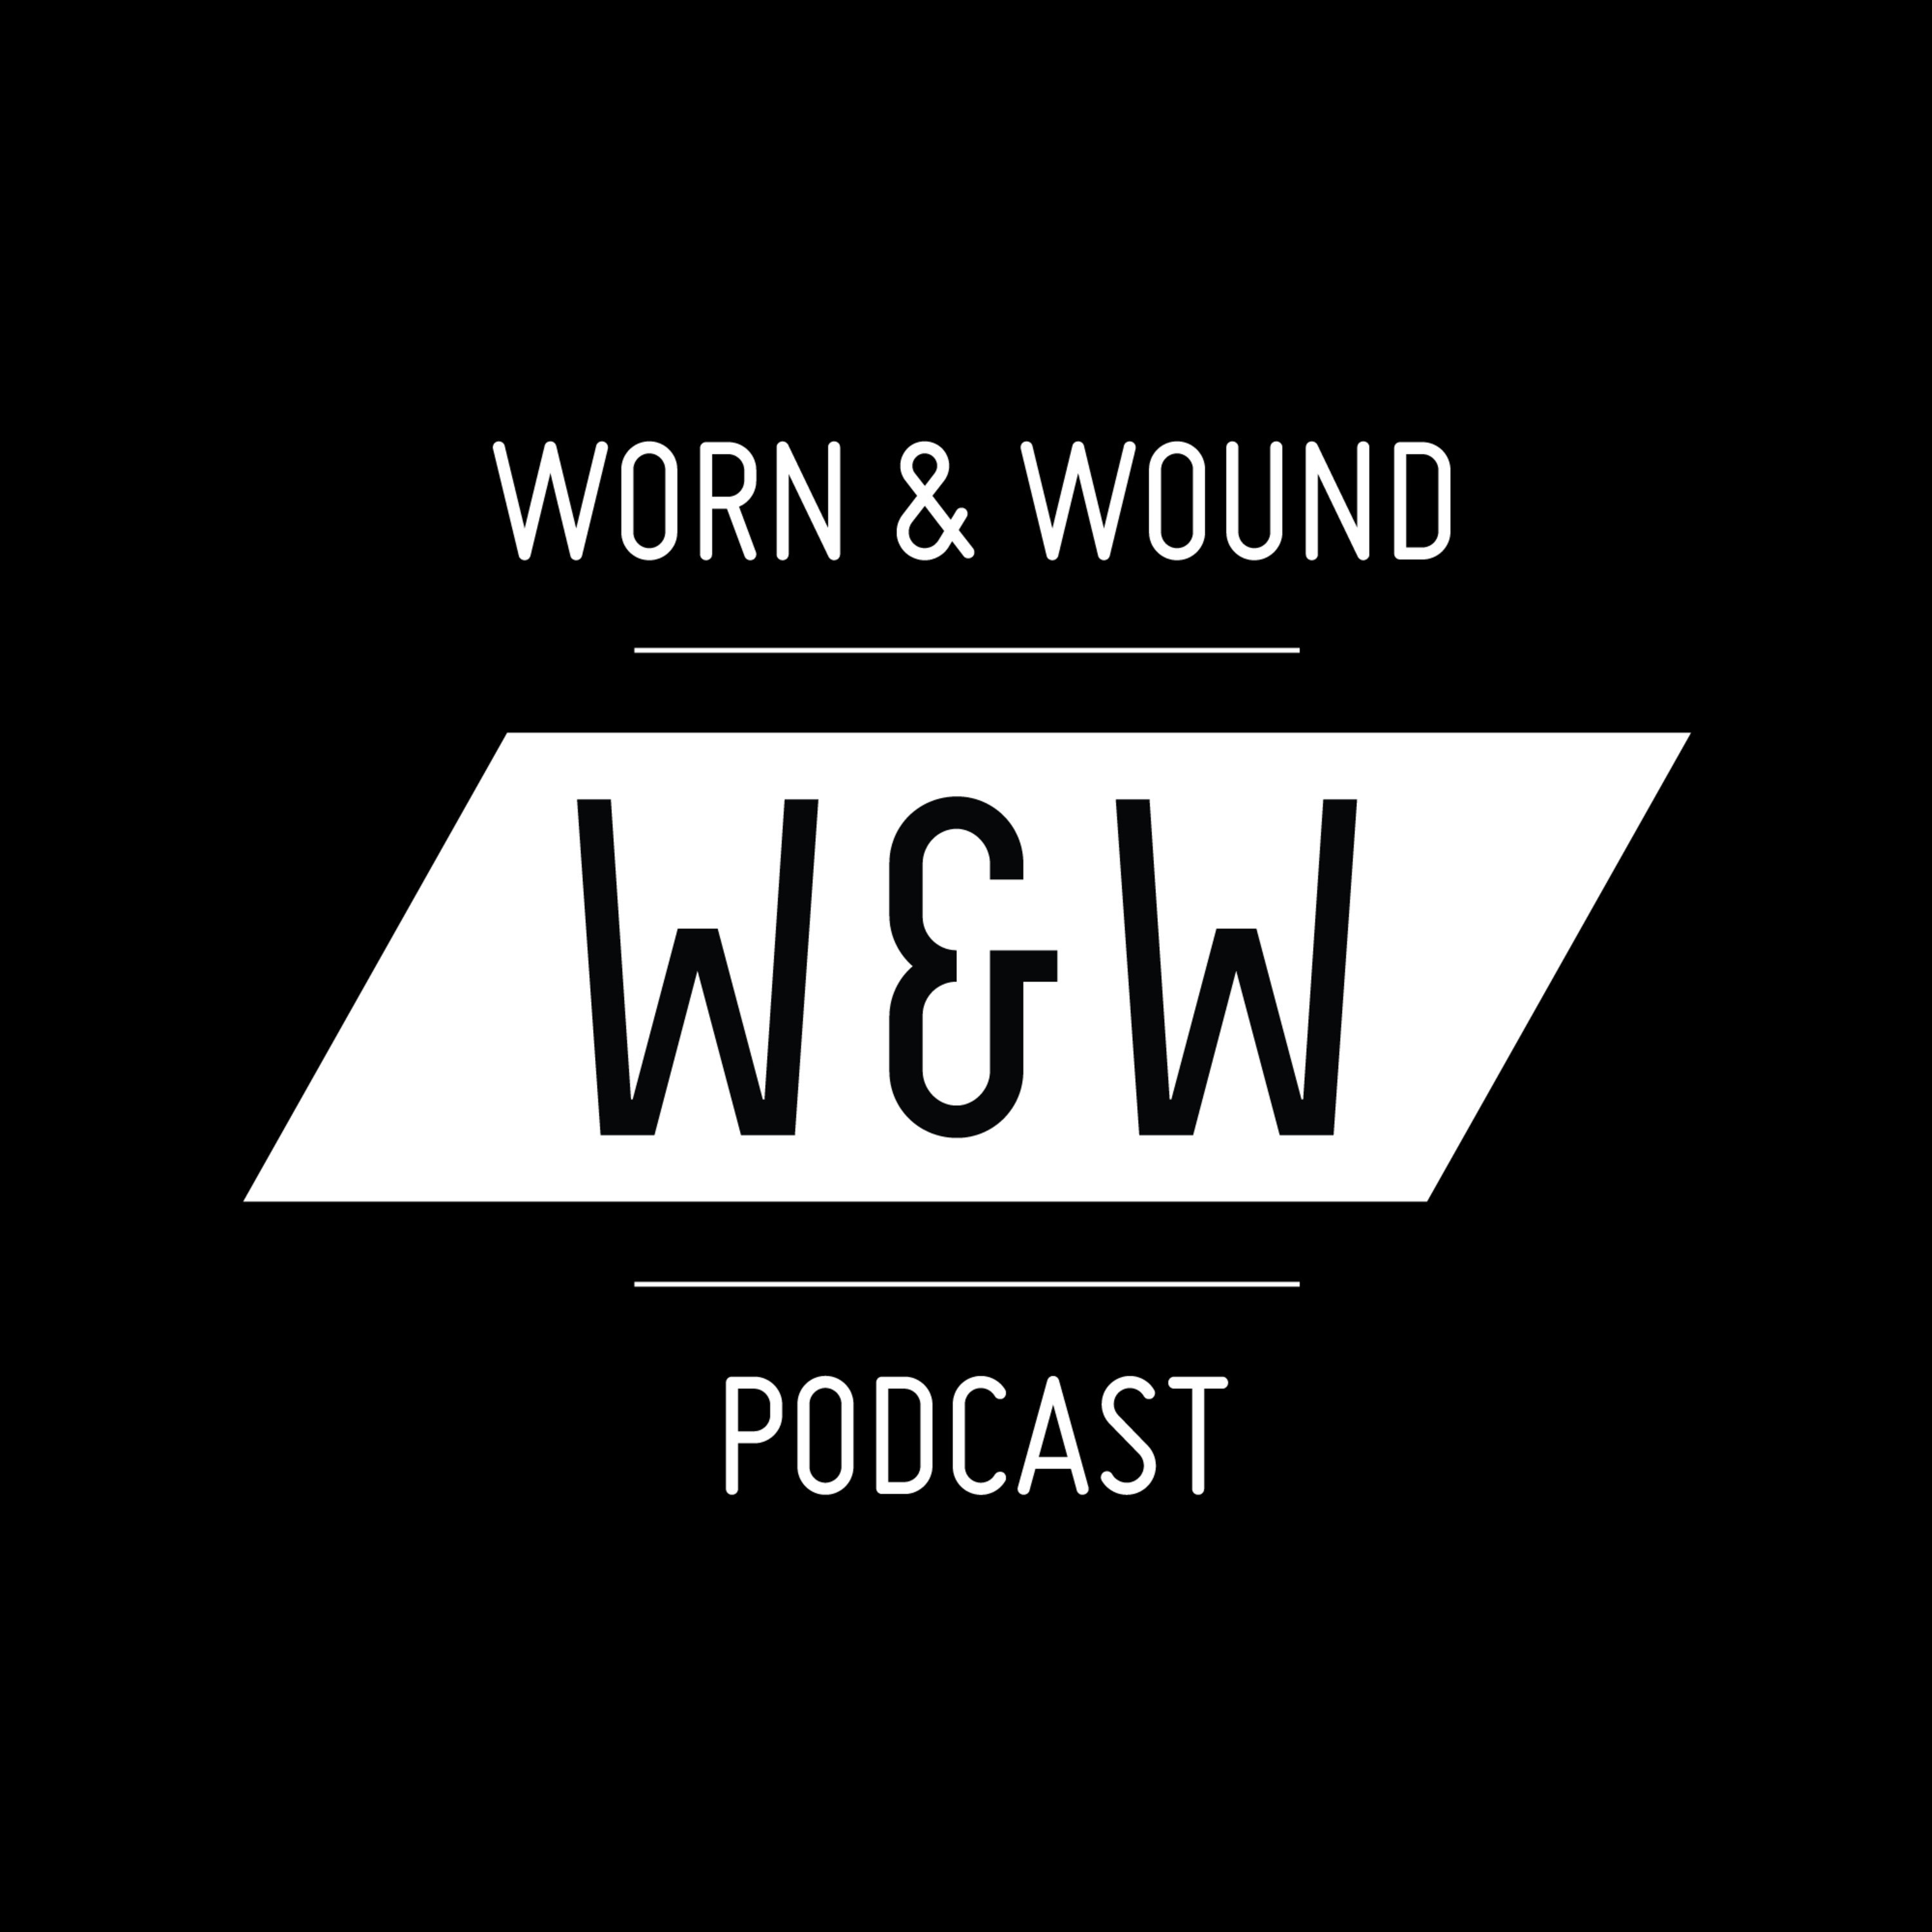 The Worn & Wound Podcast 